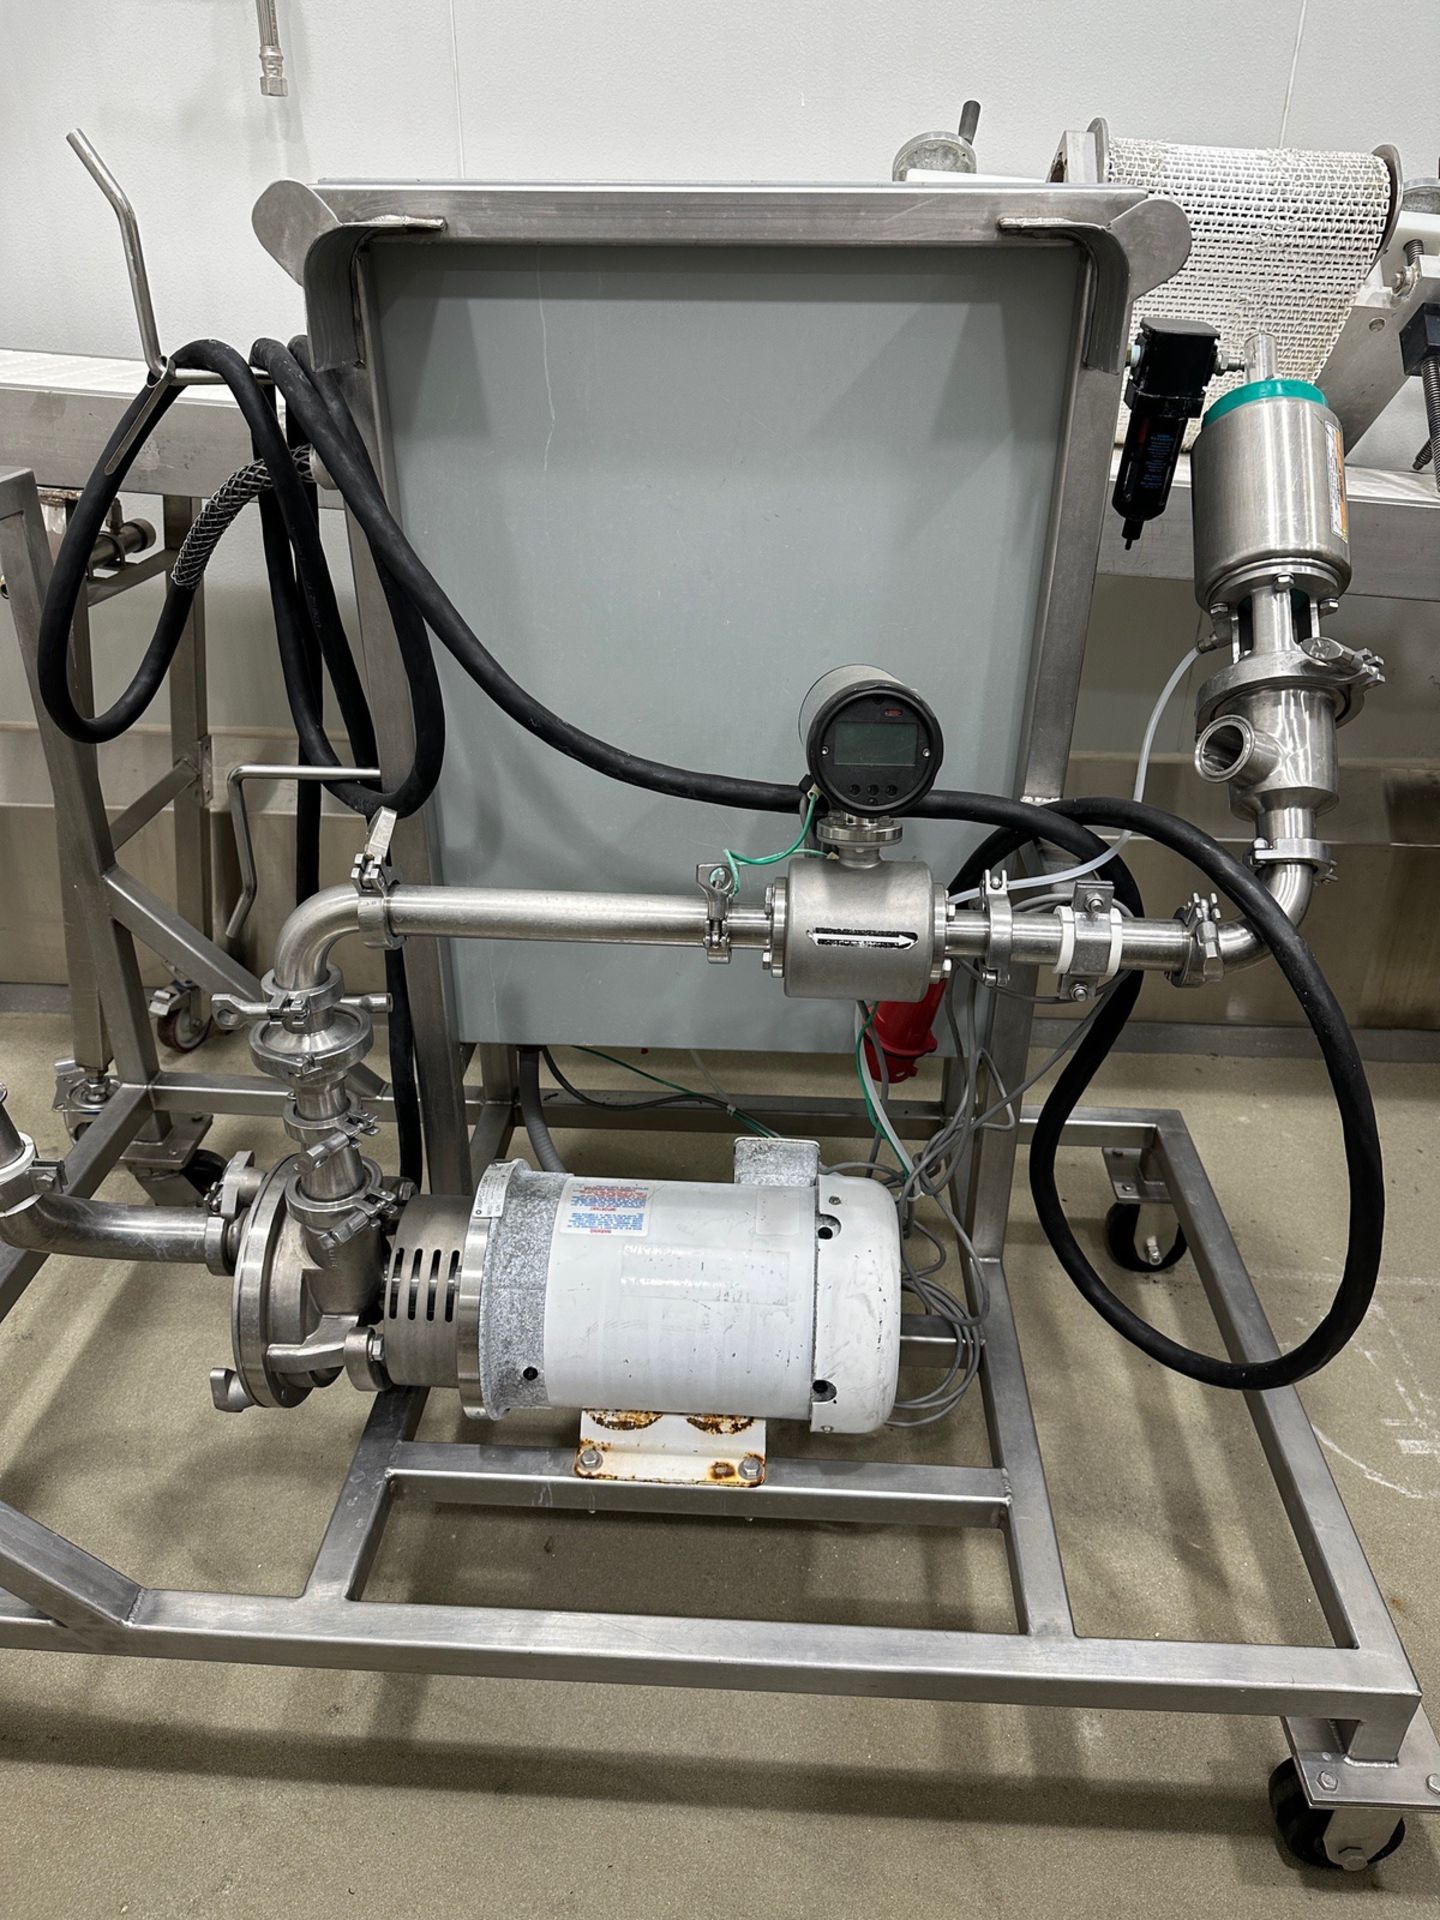 Atlas Batching Station with Ampco Centrifugal Pump Skid, Valve and Flow Meter | Rig Fee $175